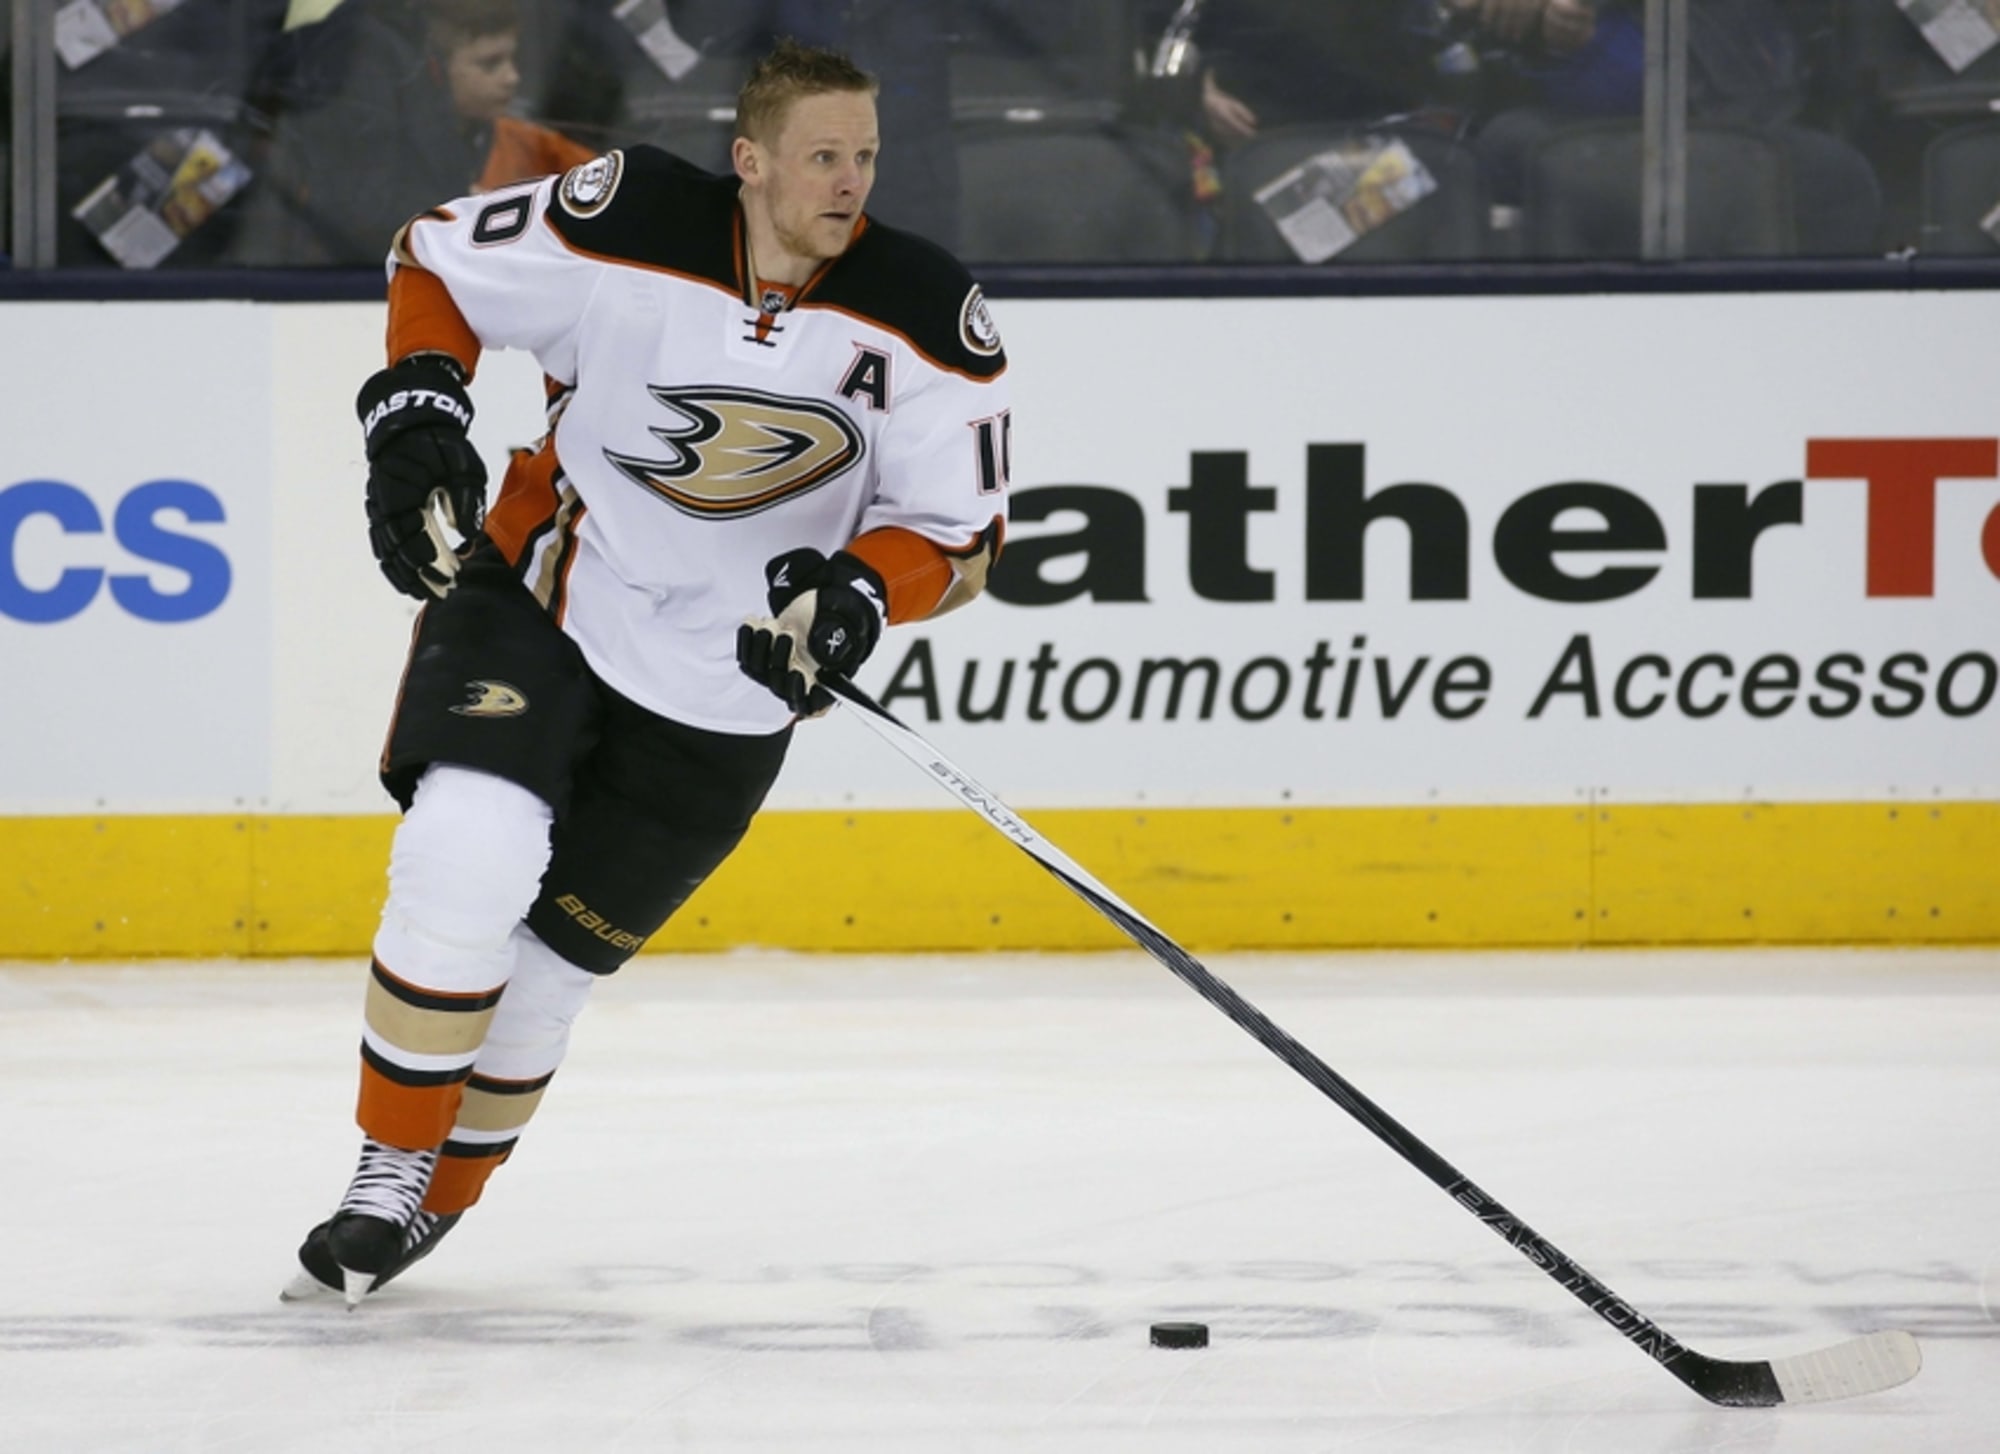 Corey Perry to captain Team Canada at worlds